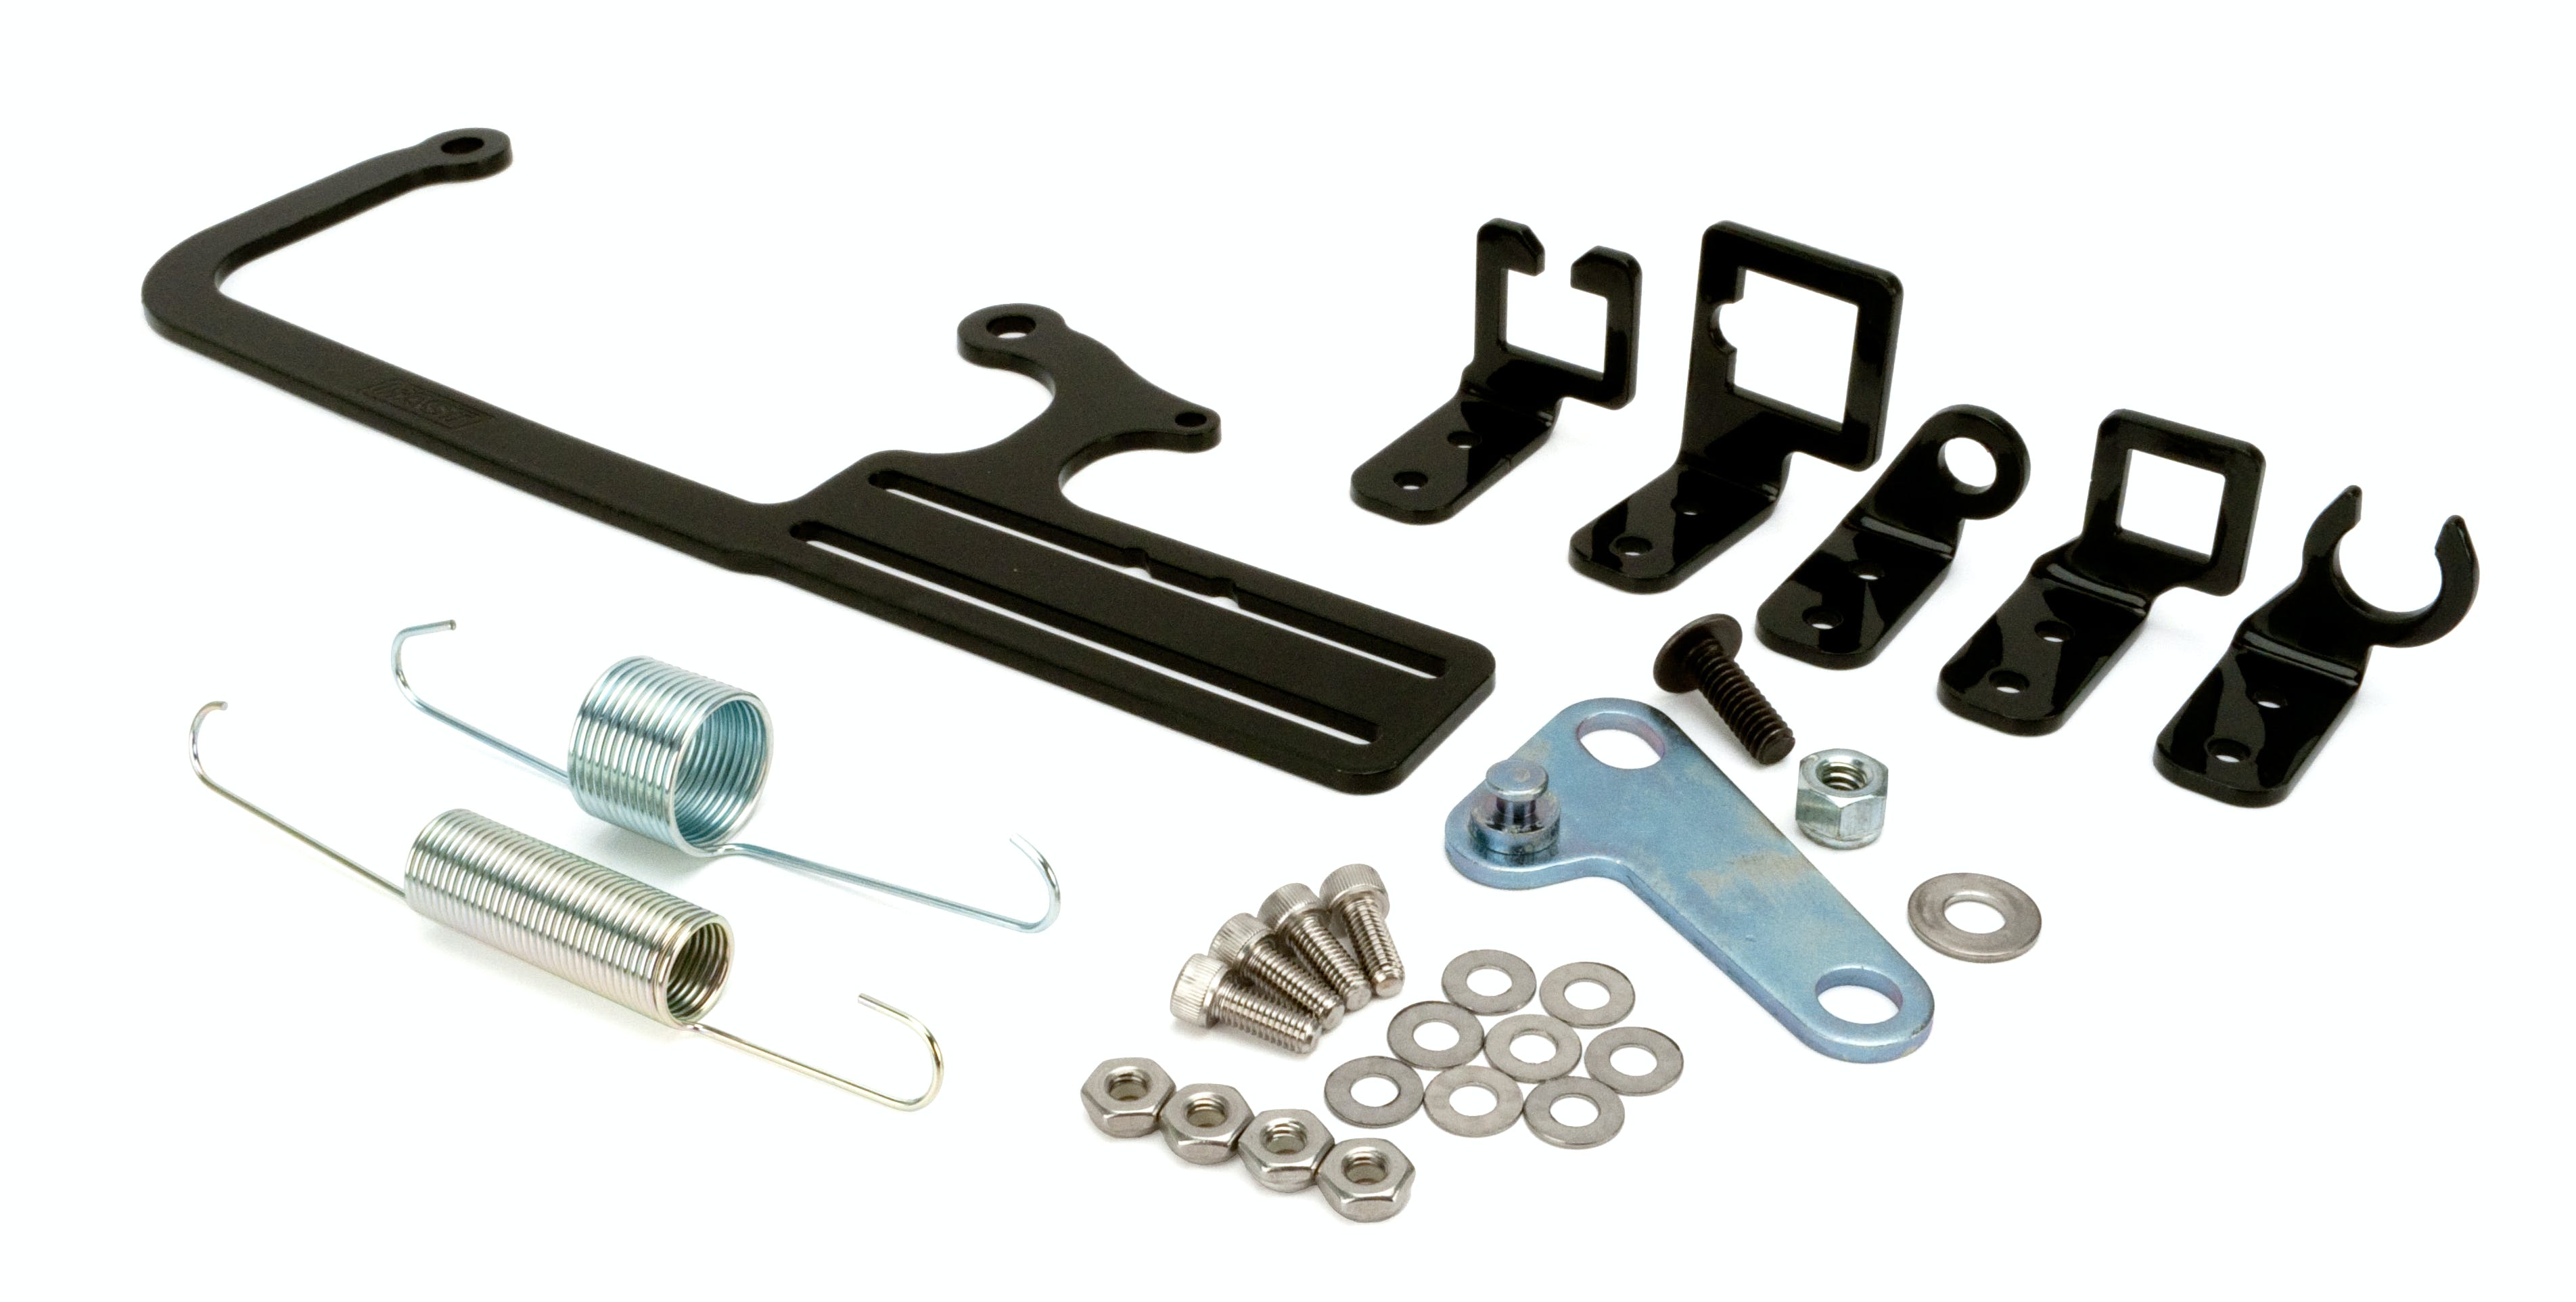 FAST - Fuel Air Spark Technology 304147 Cable Mount kit for EZ EFI Fuel + Ignition Throttle Body Injection Systems